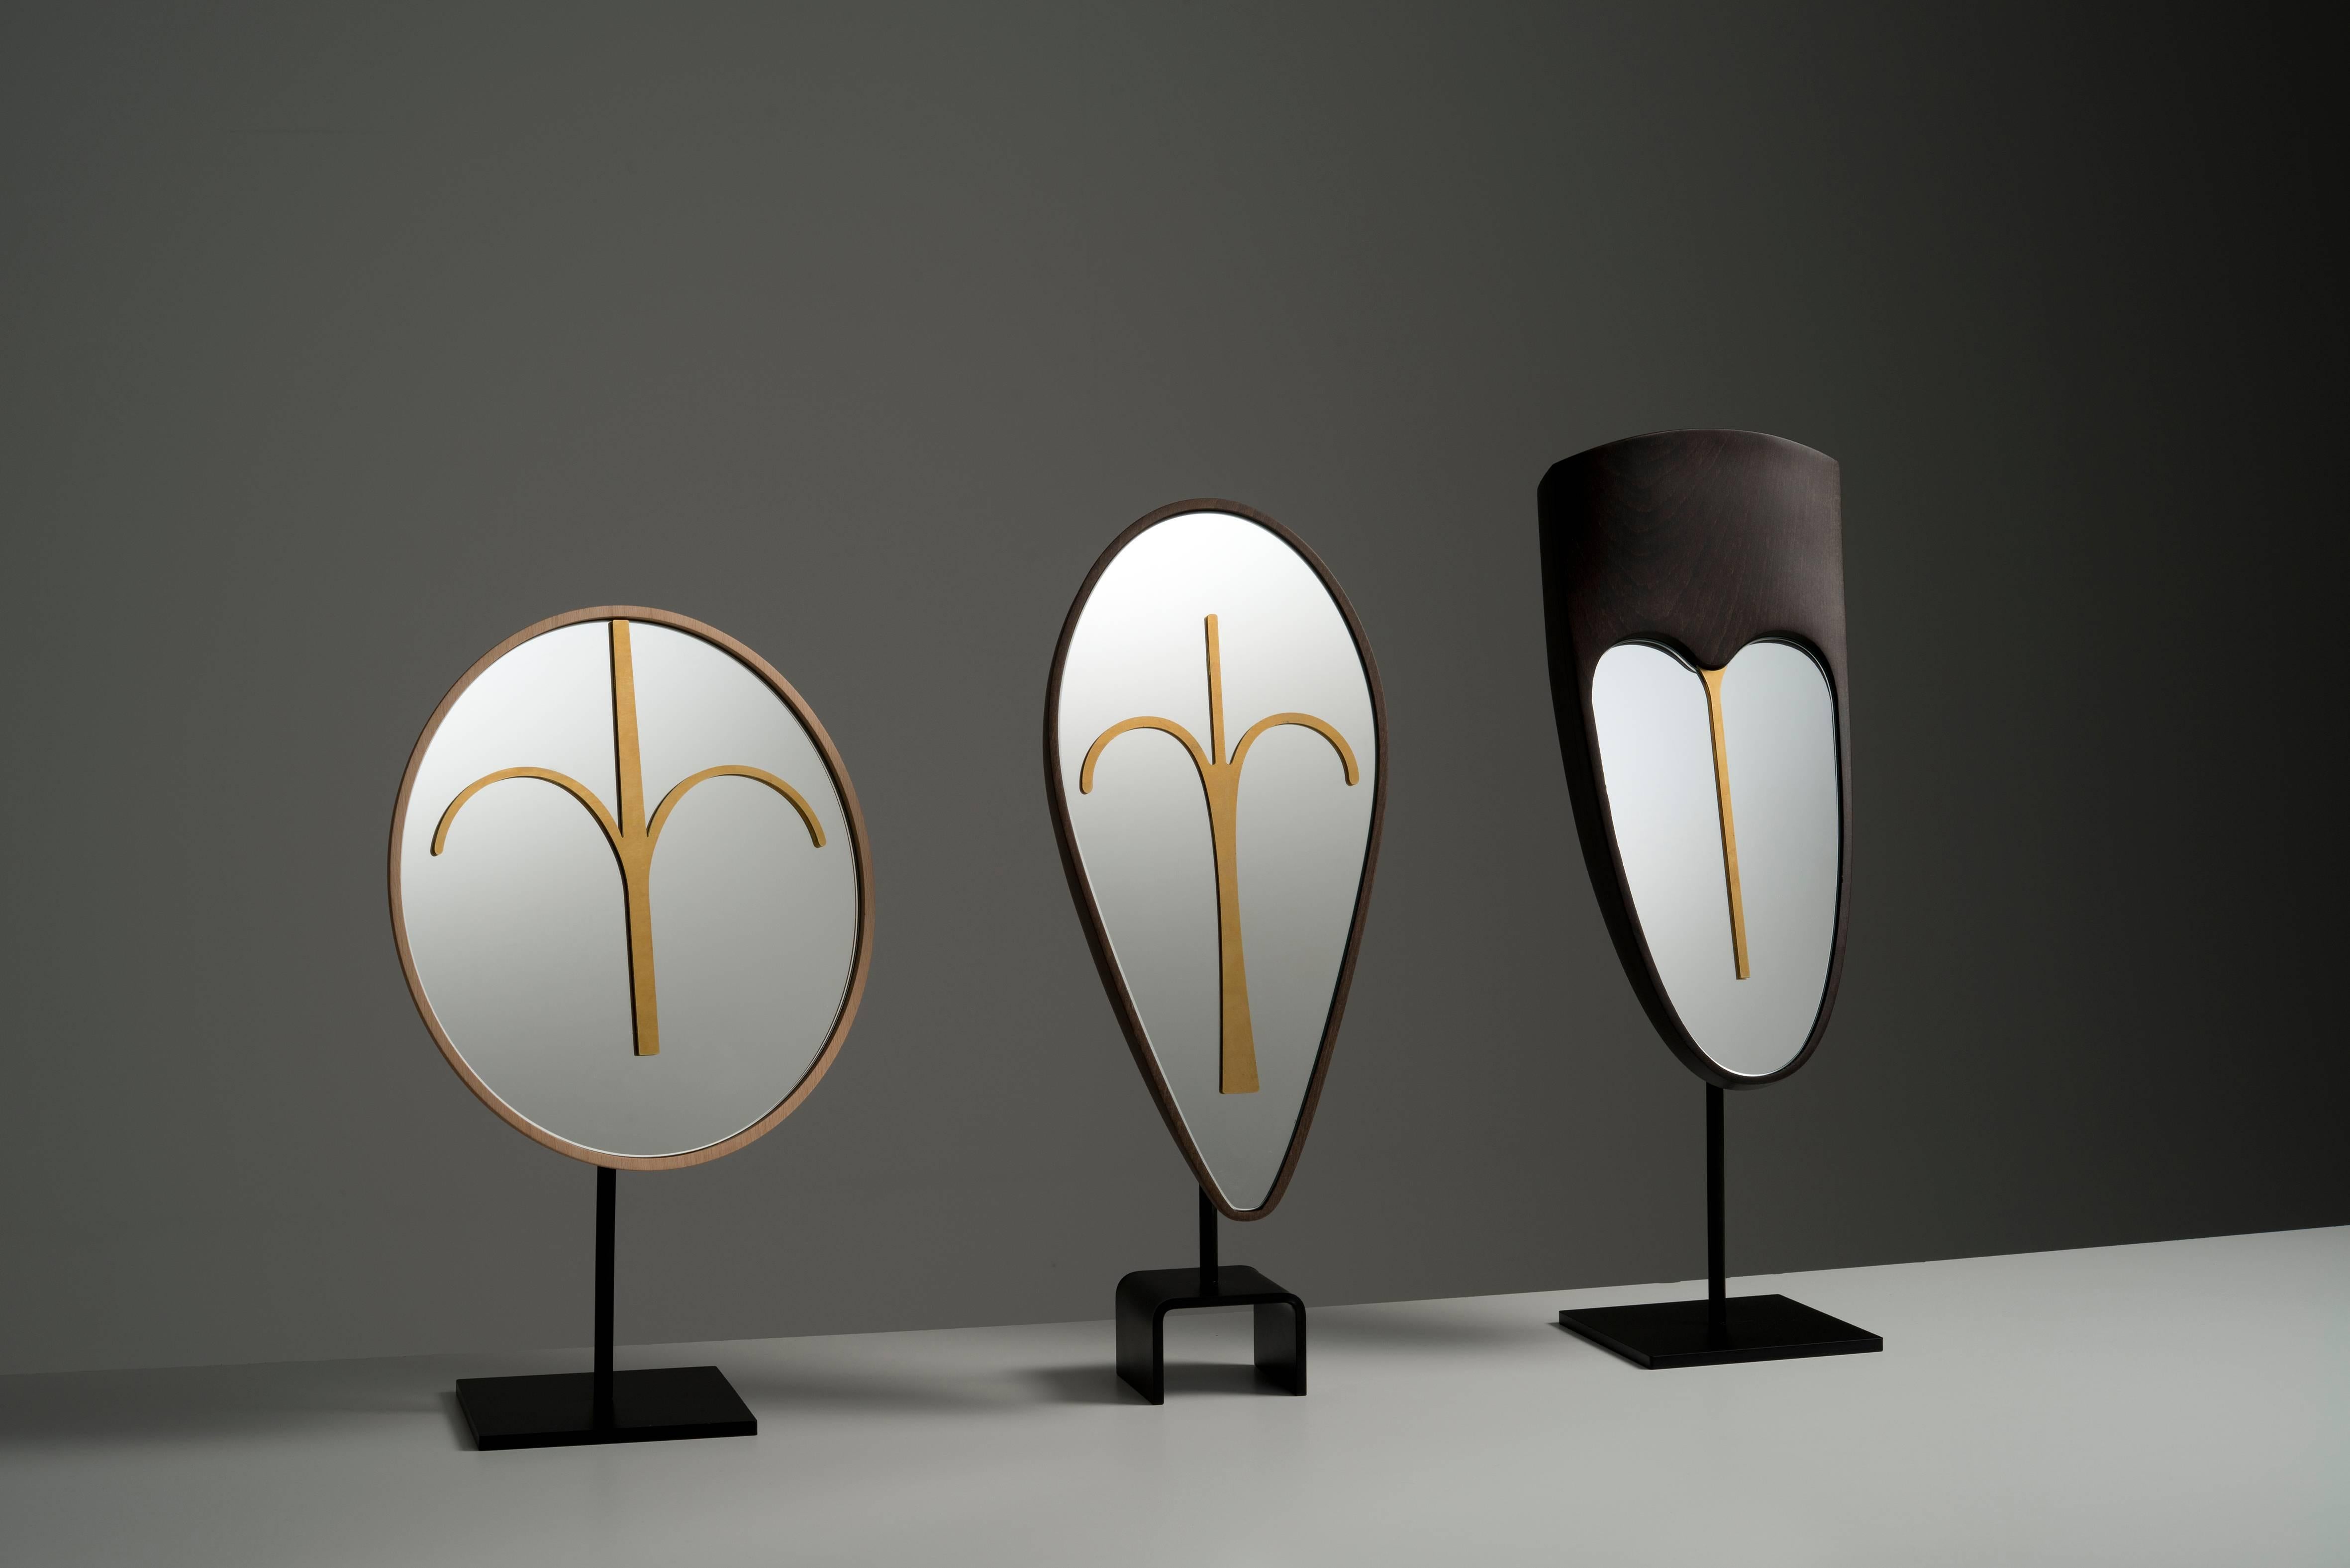 Three functional mirrors for a dressing room, or wooden masks and sculptures for your living or your entrance. Three different characters, who live together in harmony despite the difference in their color, like the 3 Wise Men who come from distant